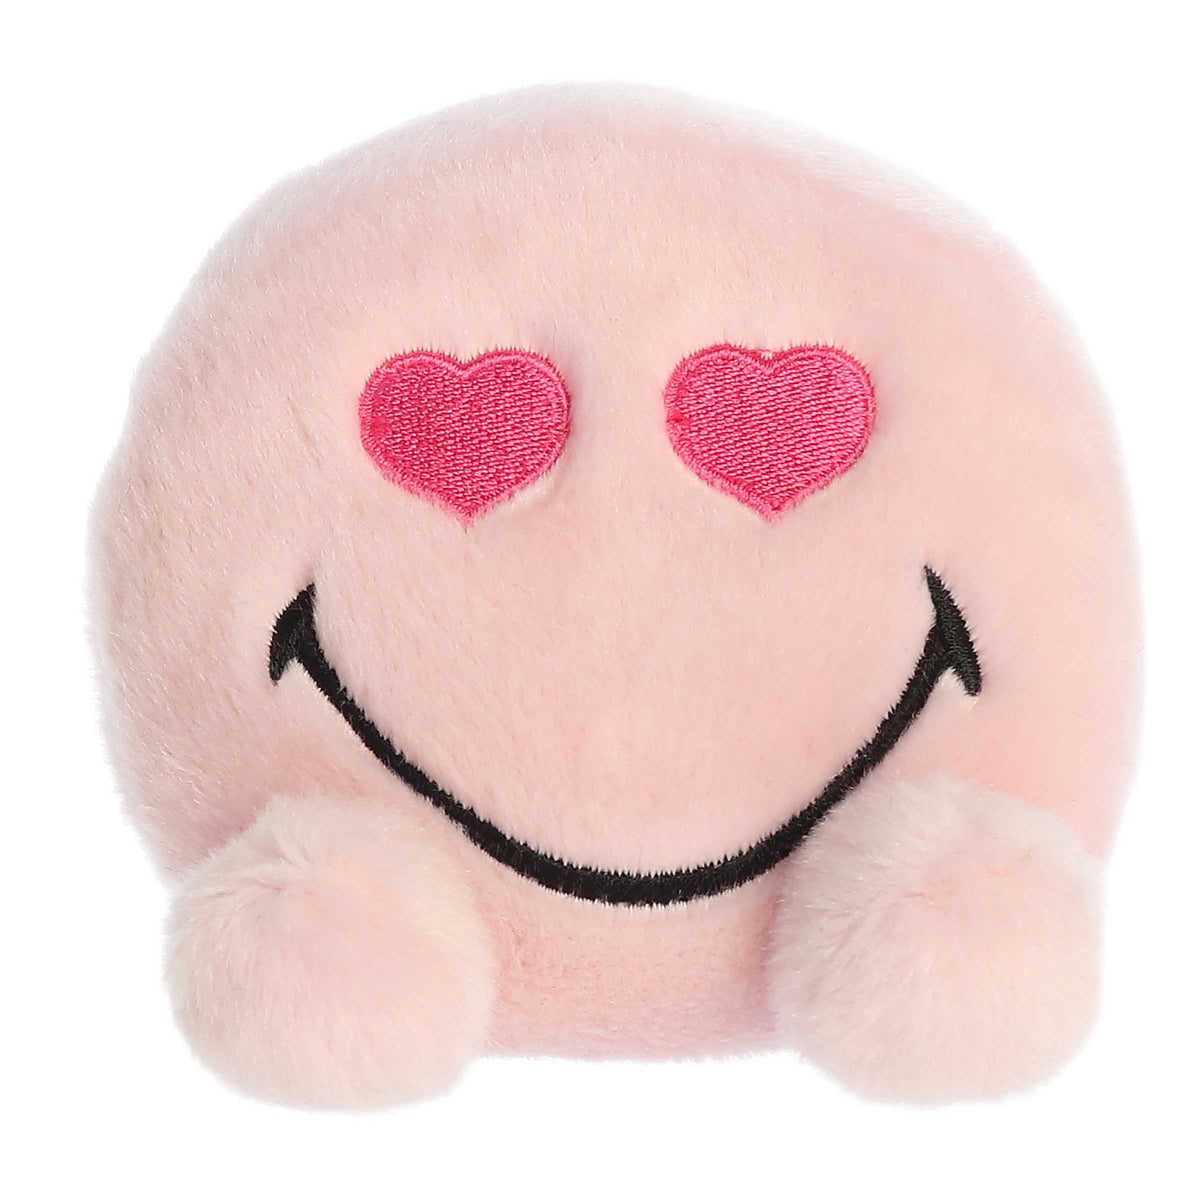 SmileyWorld Heart Eyes plush, pink with heart-shaped eyes and a big smile